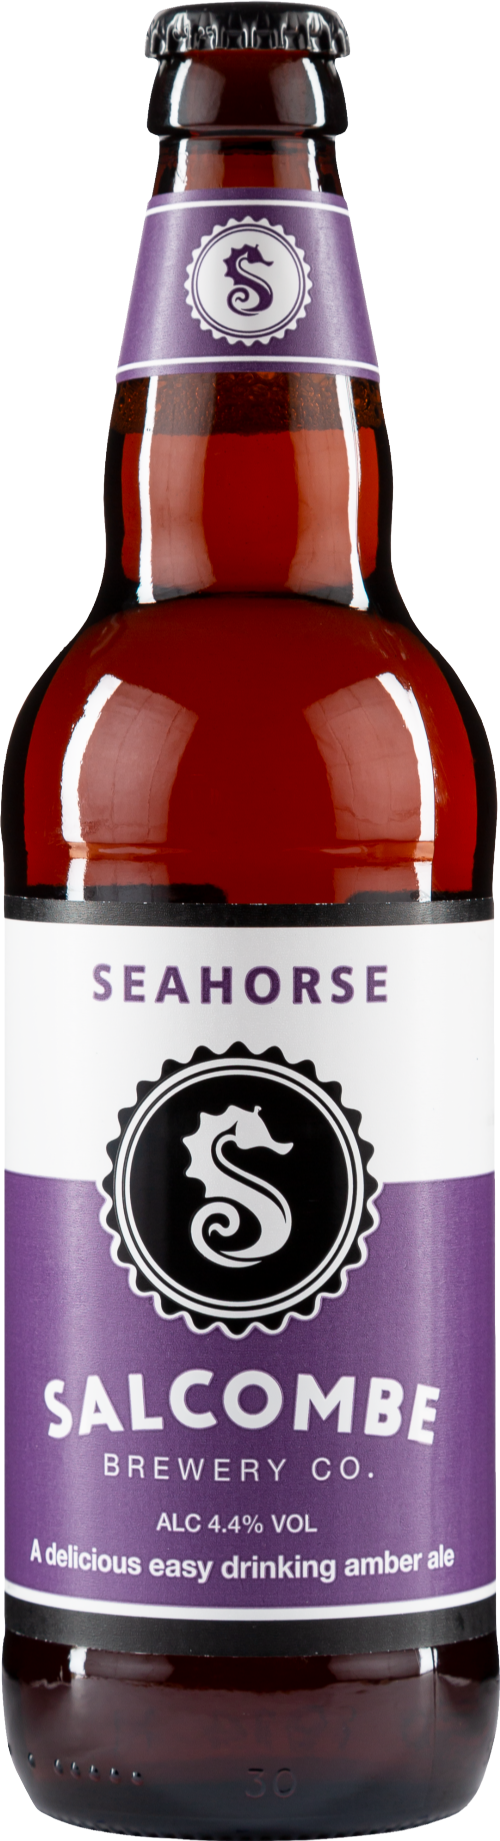 SALCOMBE BREWERY CO. Seahorse Ale 4.4% ABV 50cl